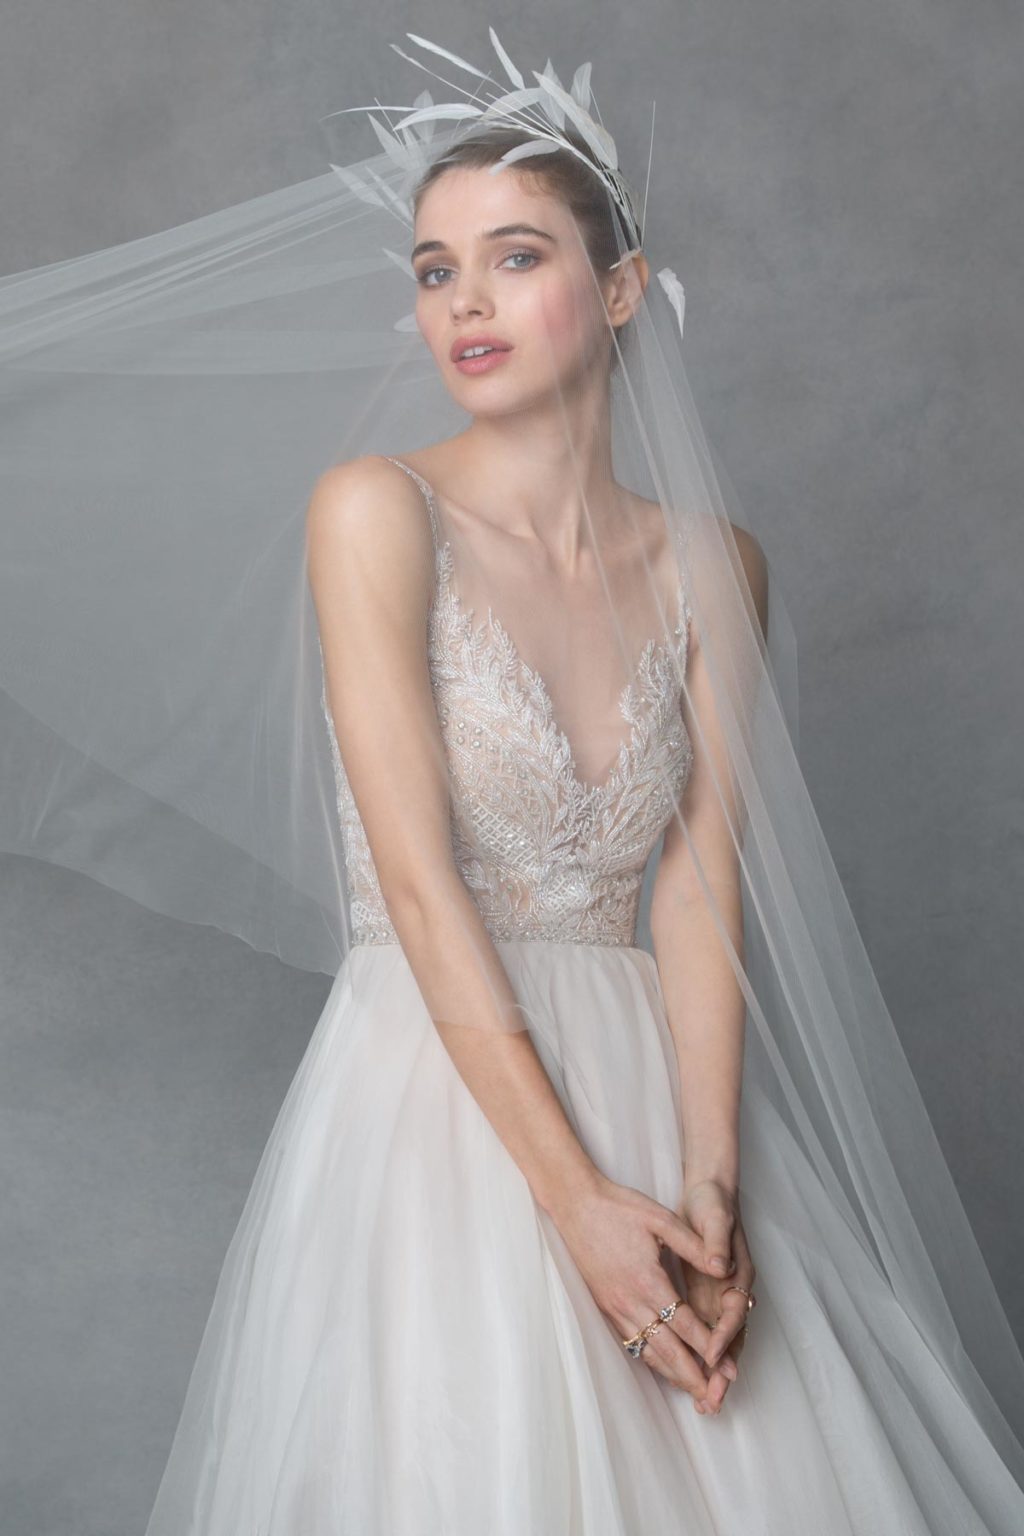 - The Lily Rose Bridal Boutique